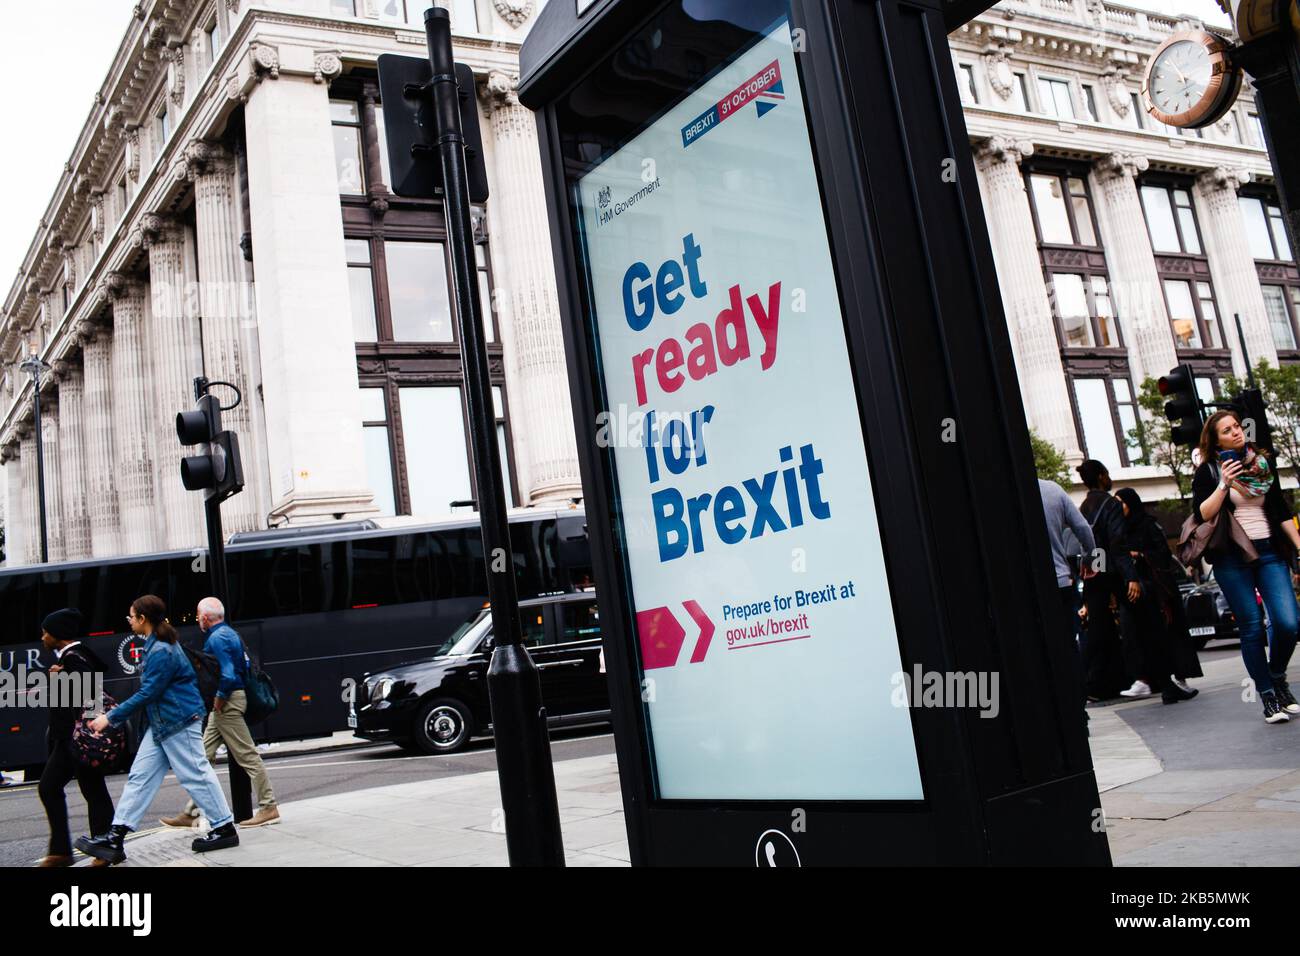 A 'Get ready for Brexit' sign, part of a huge government advertising campaign launched ahead of Britain's scheduled October 31 departure from the EU, lights up an information screen on the corner of North Audley Street and Oxford Street in London, England, on September 10, 2019. MPs last night voted for a second time to deny Prime Minister Boris Johnson a general election before Britain's scheduled departure from the European Union on October 31. Speaking ahead of the vote, the prime minister insisted that he would not ask the EU for any further extension to Brexit, leaving him now with few op Stock Photo